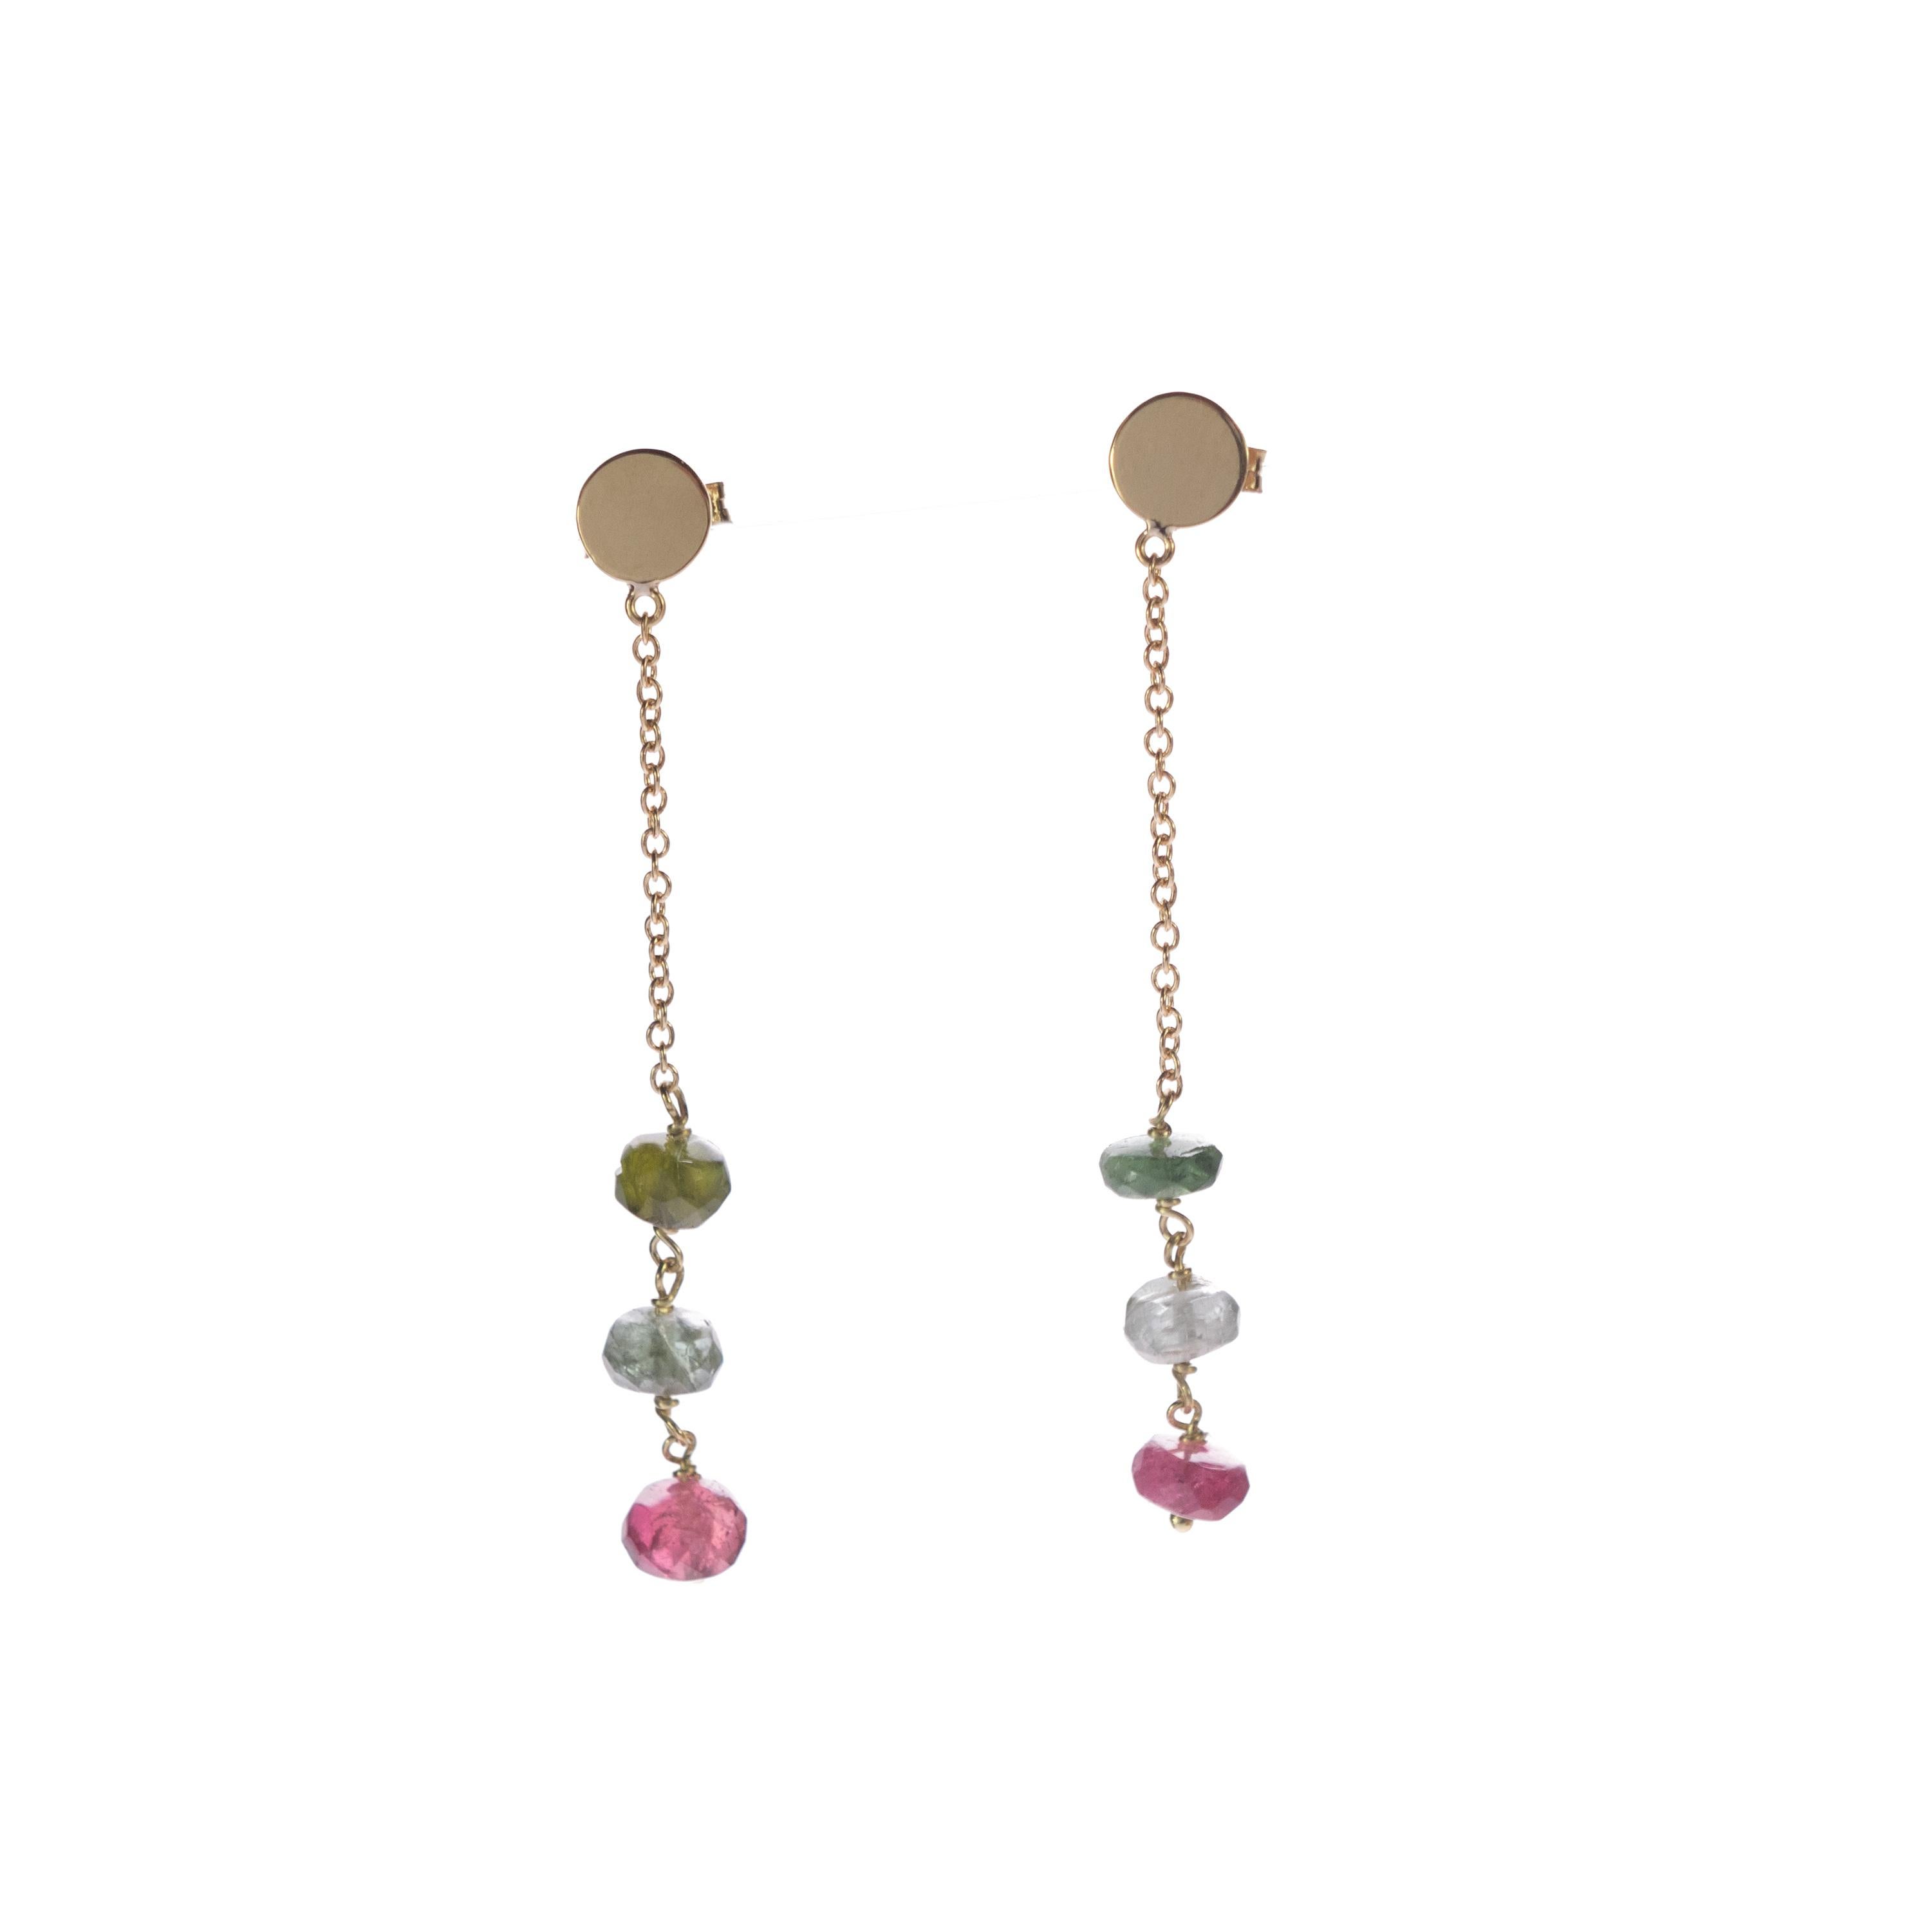 Intini Jewels signature quality on a modern and contemporary design jewel. Stunning earrings with three tourmaline rondelles. Three different colors that melt in each other showing beautiful gradient colors. Embellished with a 18 karat yellow gold